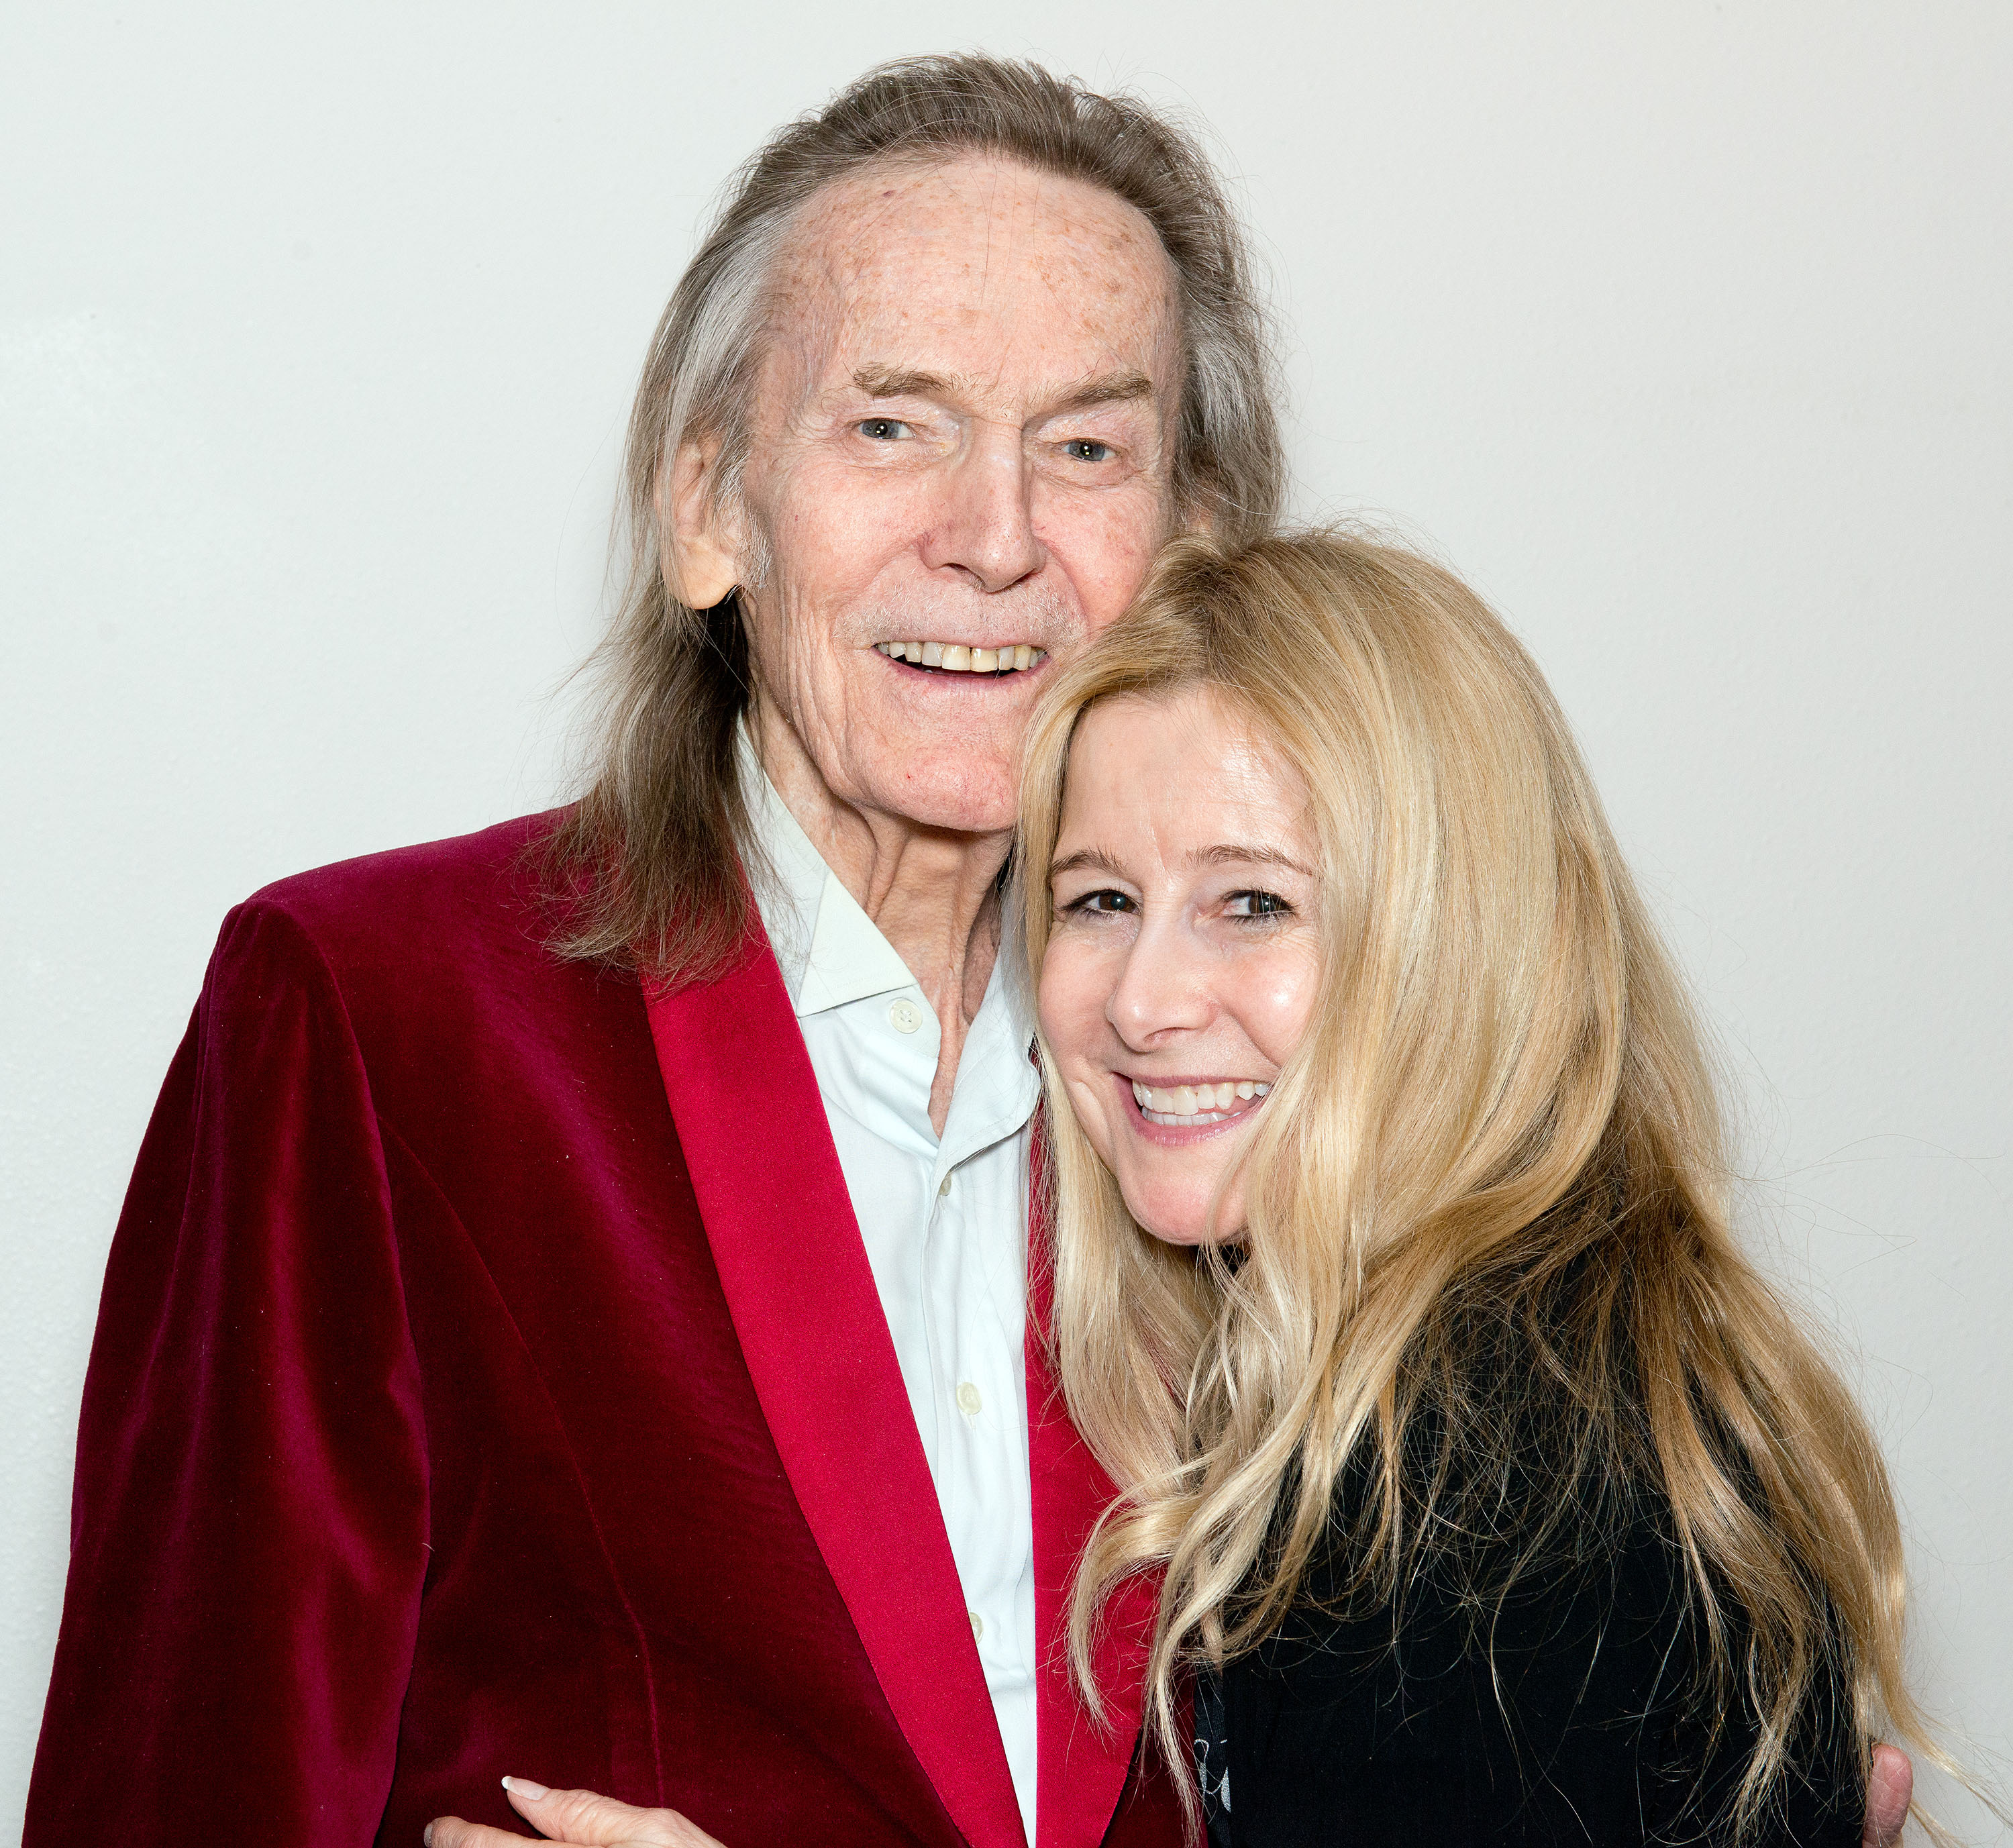 Songwriter Gordon Lightfoot poses backstage with his wife Kim Hasse at Route 66 Casinos Legends Theater on February 28, 2015 in Albuquerque, New Mexico | Source: Getty Images